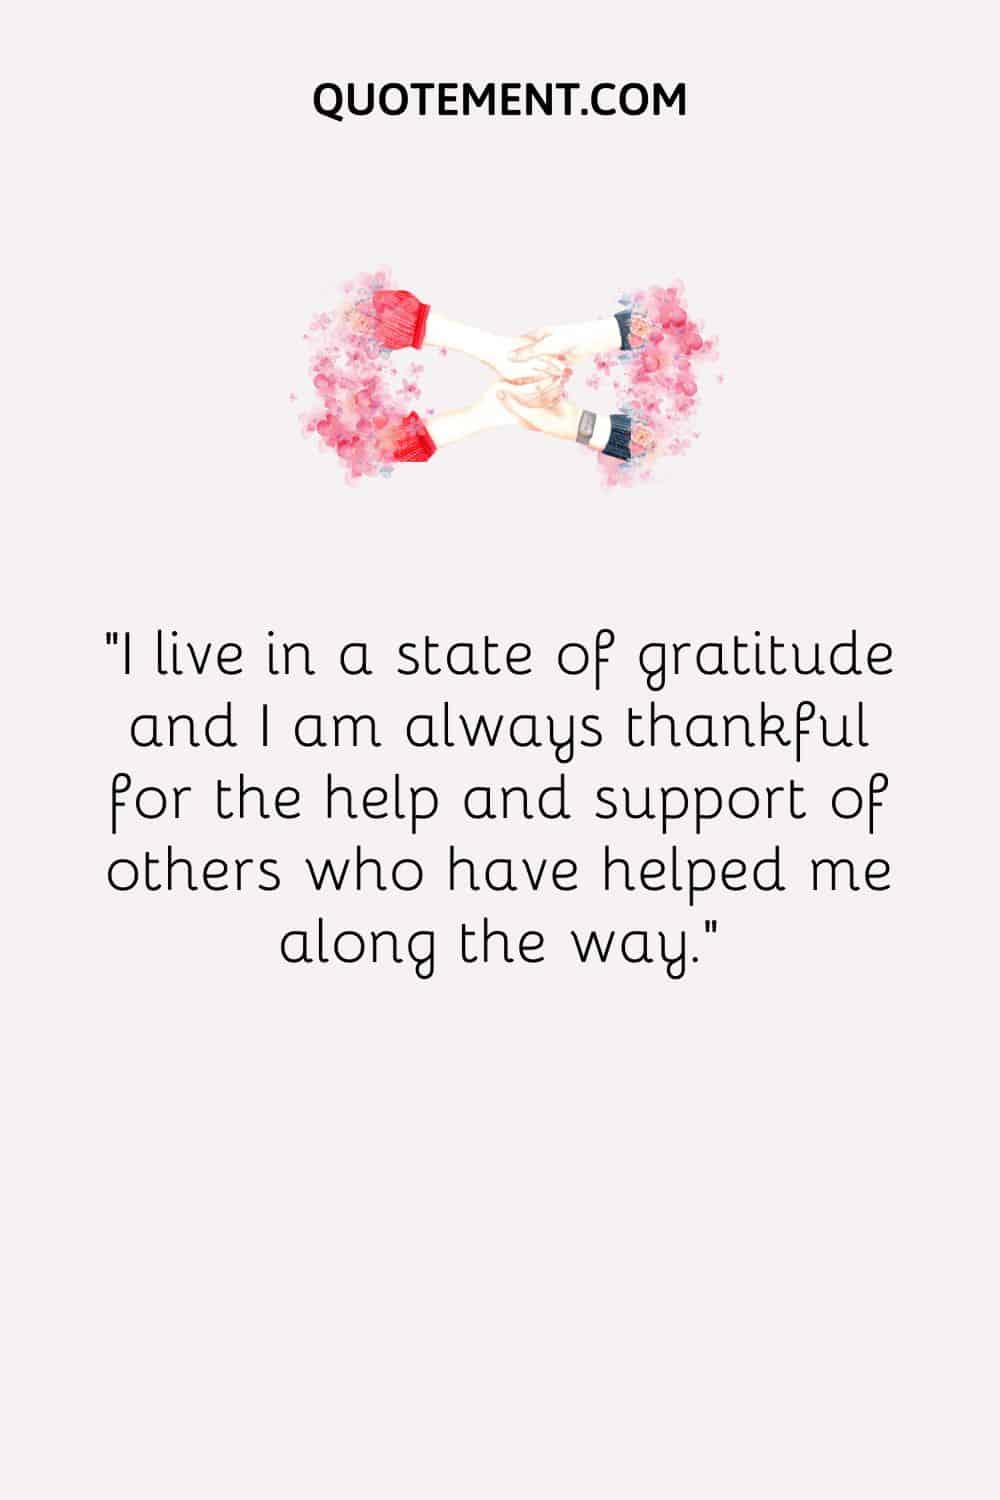 I live in a state of gratitude and I am always thankful for the help and support of others who have helped me along the way